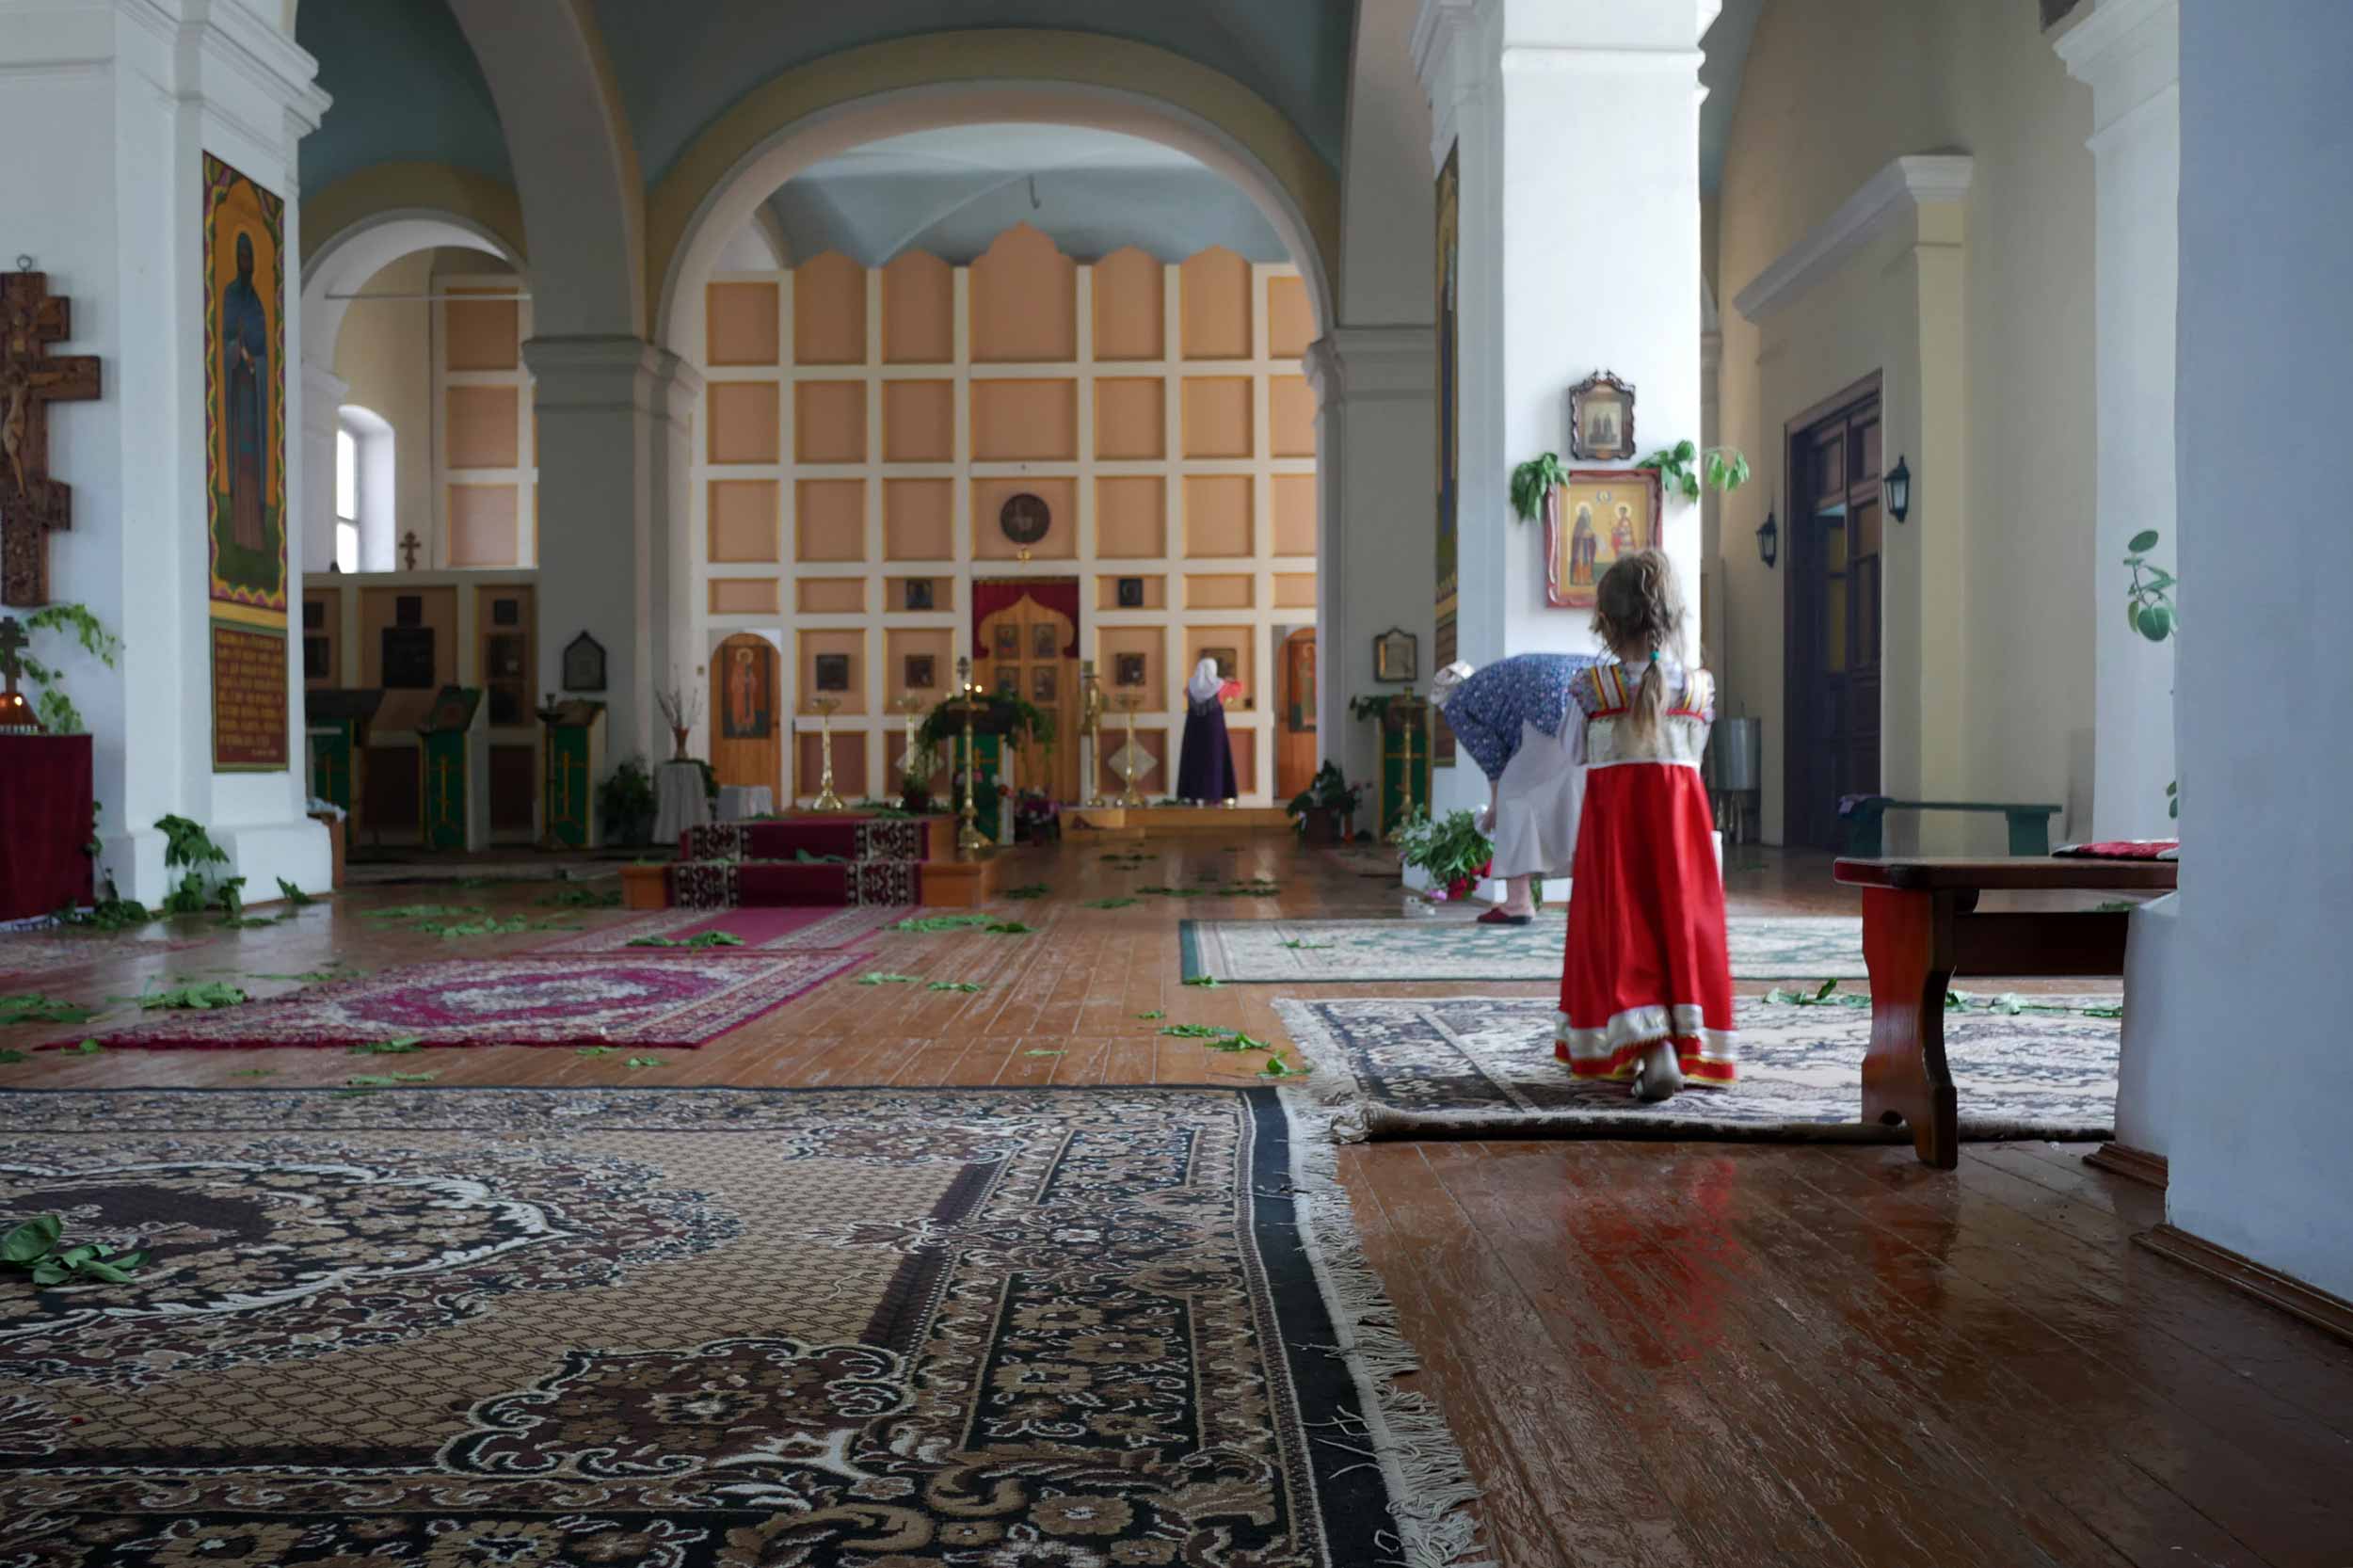 A little girl stands in the Old Believers’ church in Uralsk, in north-western Kazakstan. The community numbers about 50 people and is led by Father Konstantin, the country’s only Old Believers’ priest. © Talgat Umarov